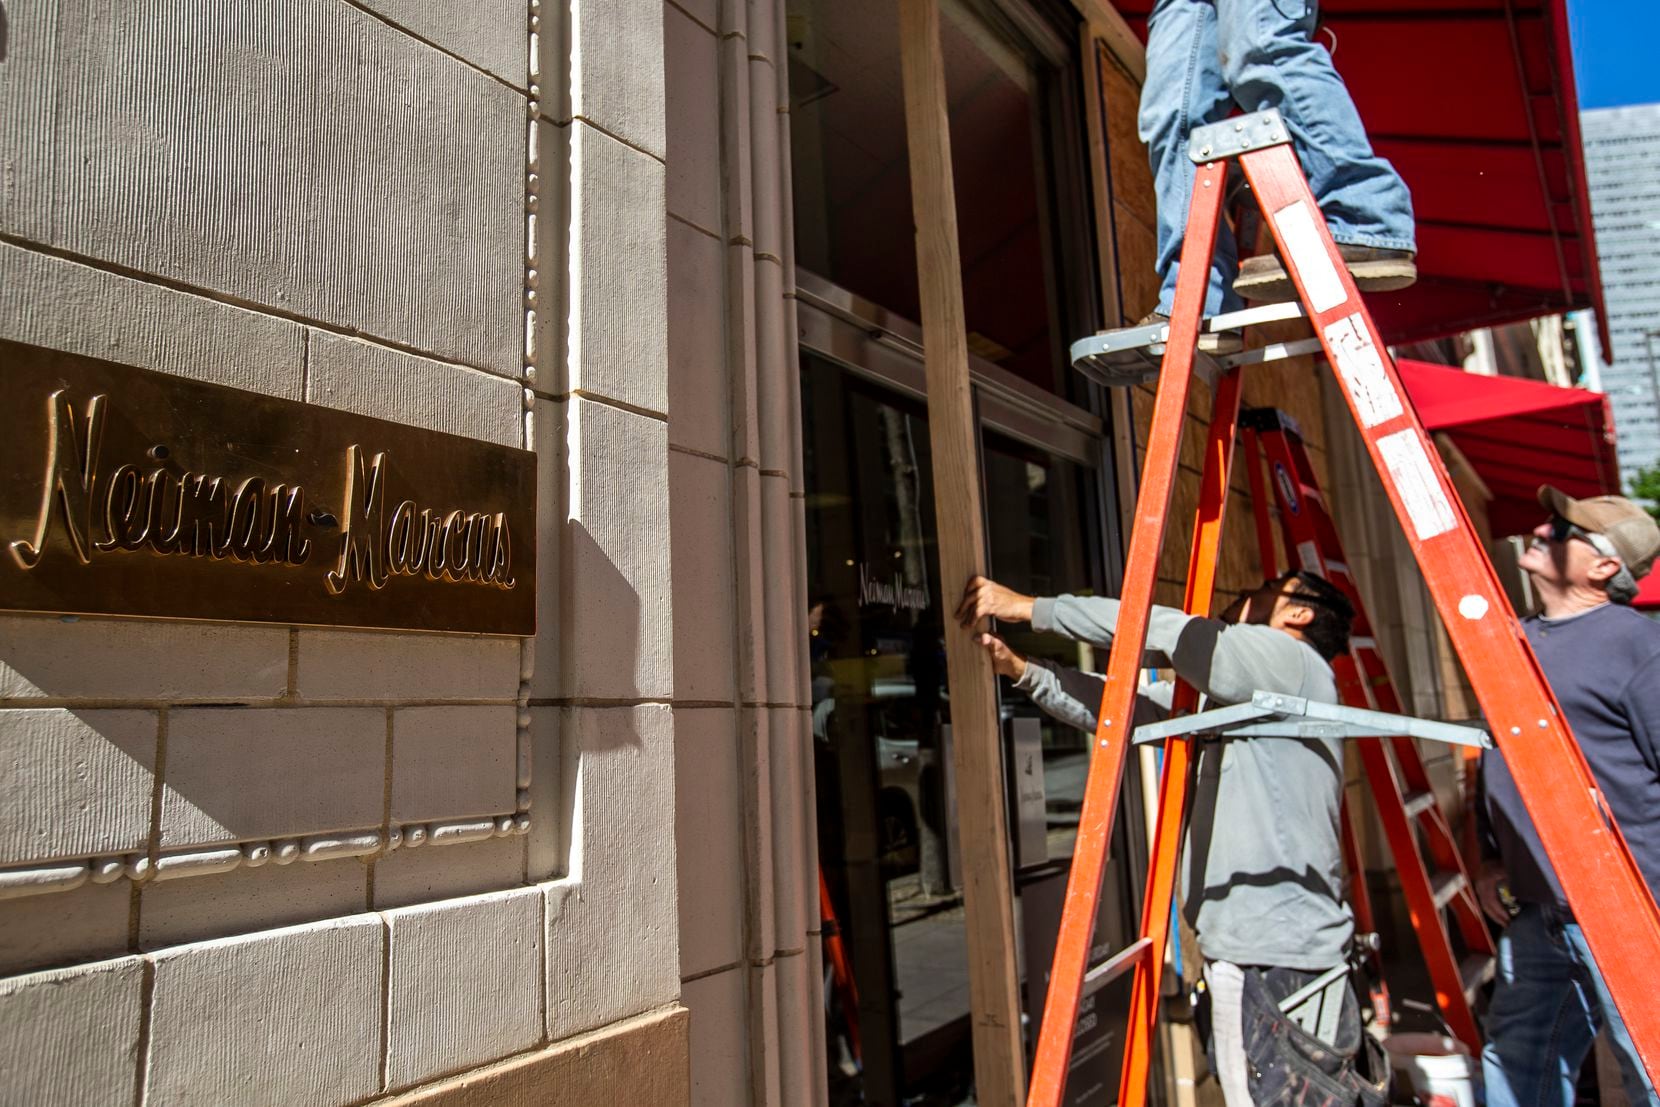 Manuel Tiscareño (center) and Harold Welch, employees at County Glass LLC, board up the storefront at Neiman Marcus in downtown Dallas on Monday, Nov. 2, 2020. Businesses throughout Deep Ellum and downtown Dallas hired various contractors to board up their buildings to deter against possible looting that might occur after the general election. (Lynda M. González/The Dallas Morning News)